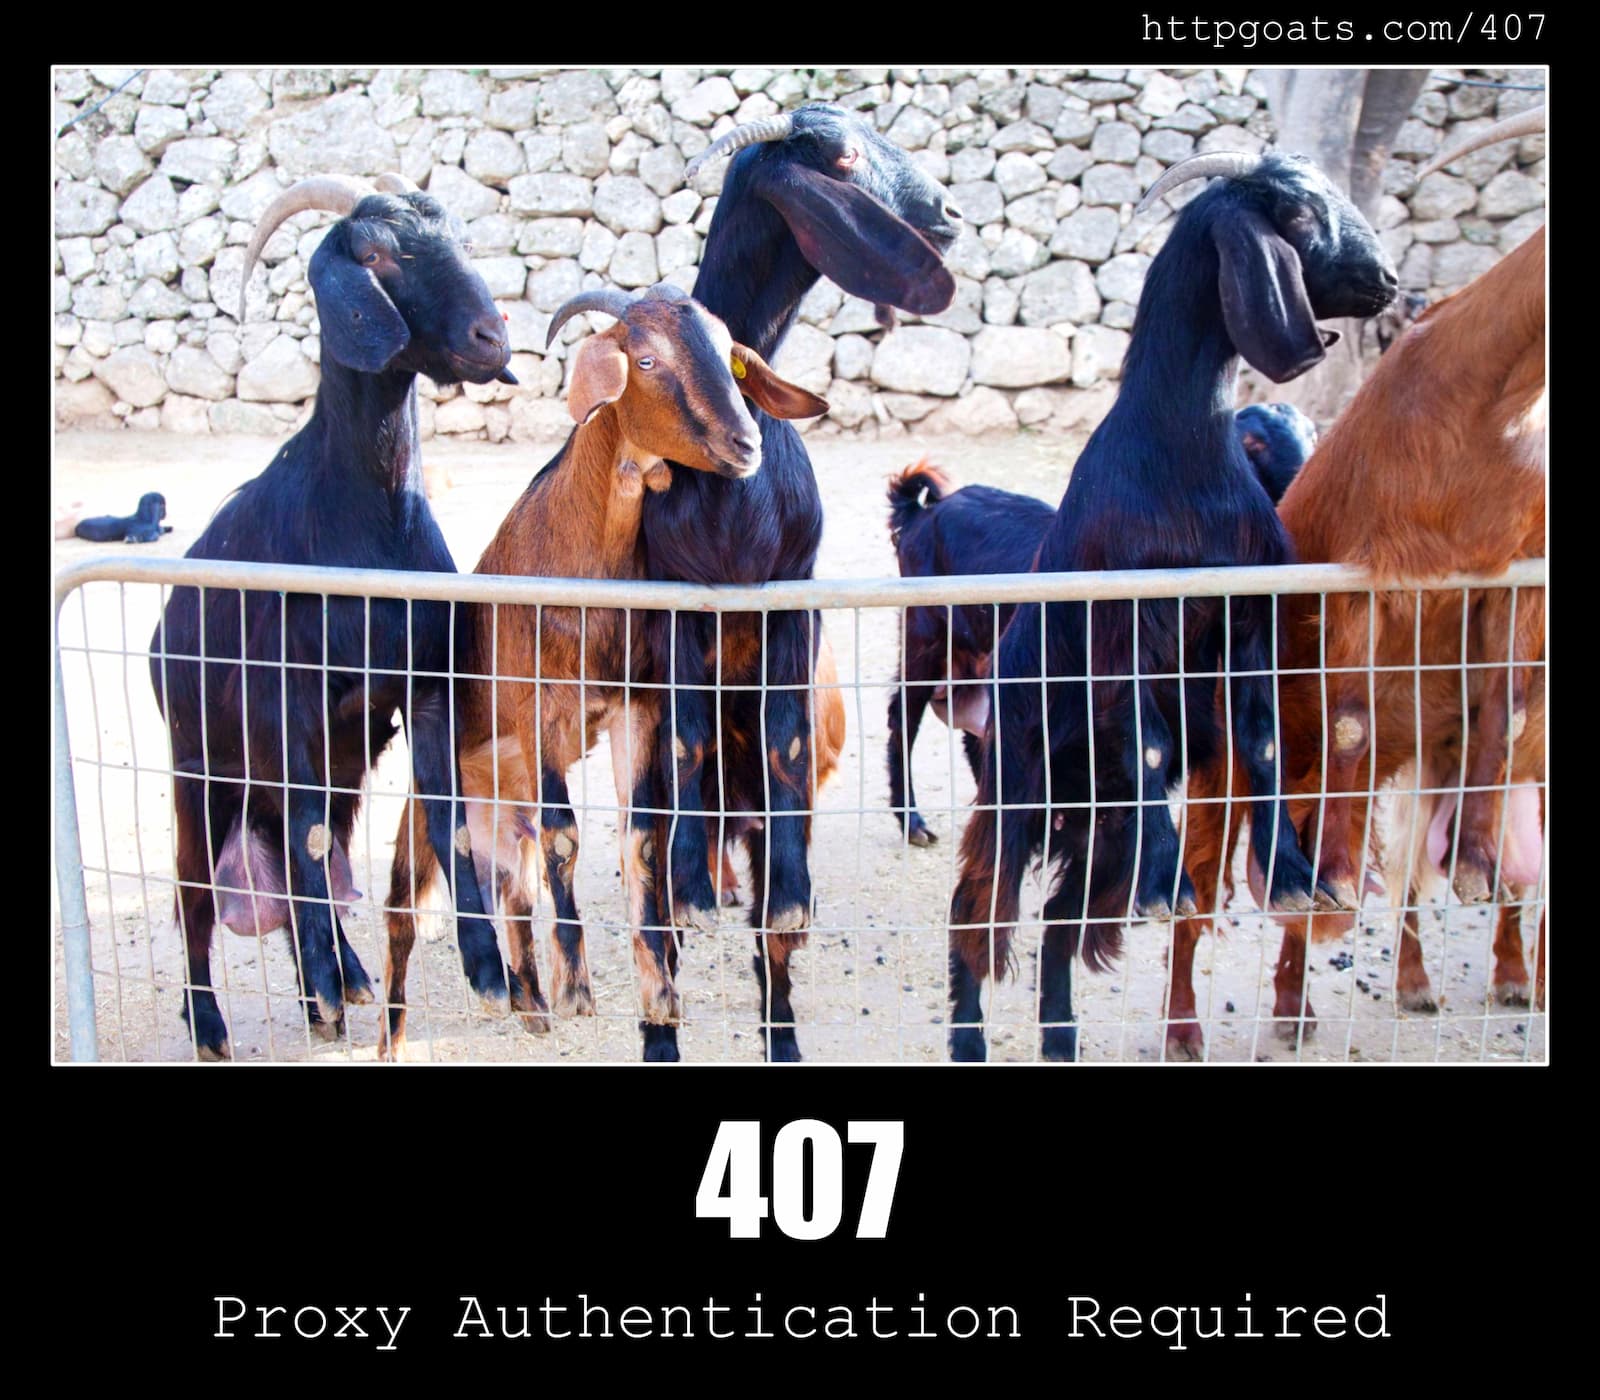 HTTP Status Code 407 Proxy Authentication Required & Goats